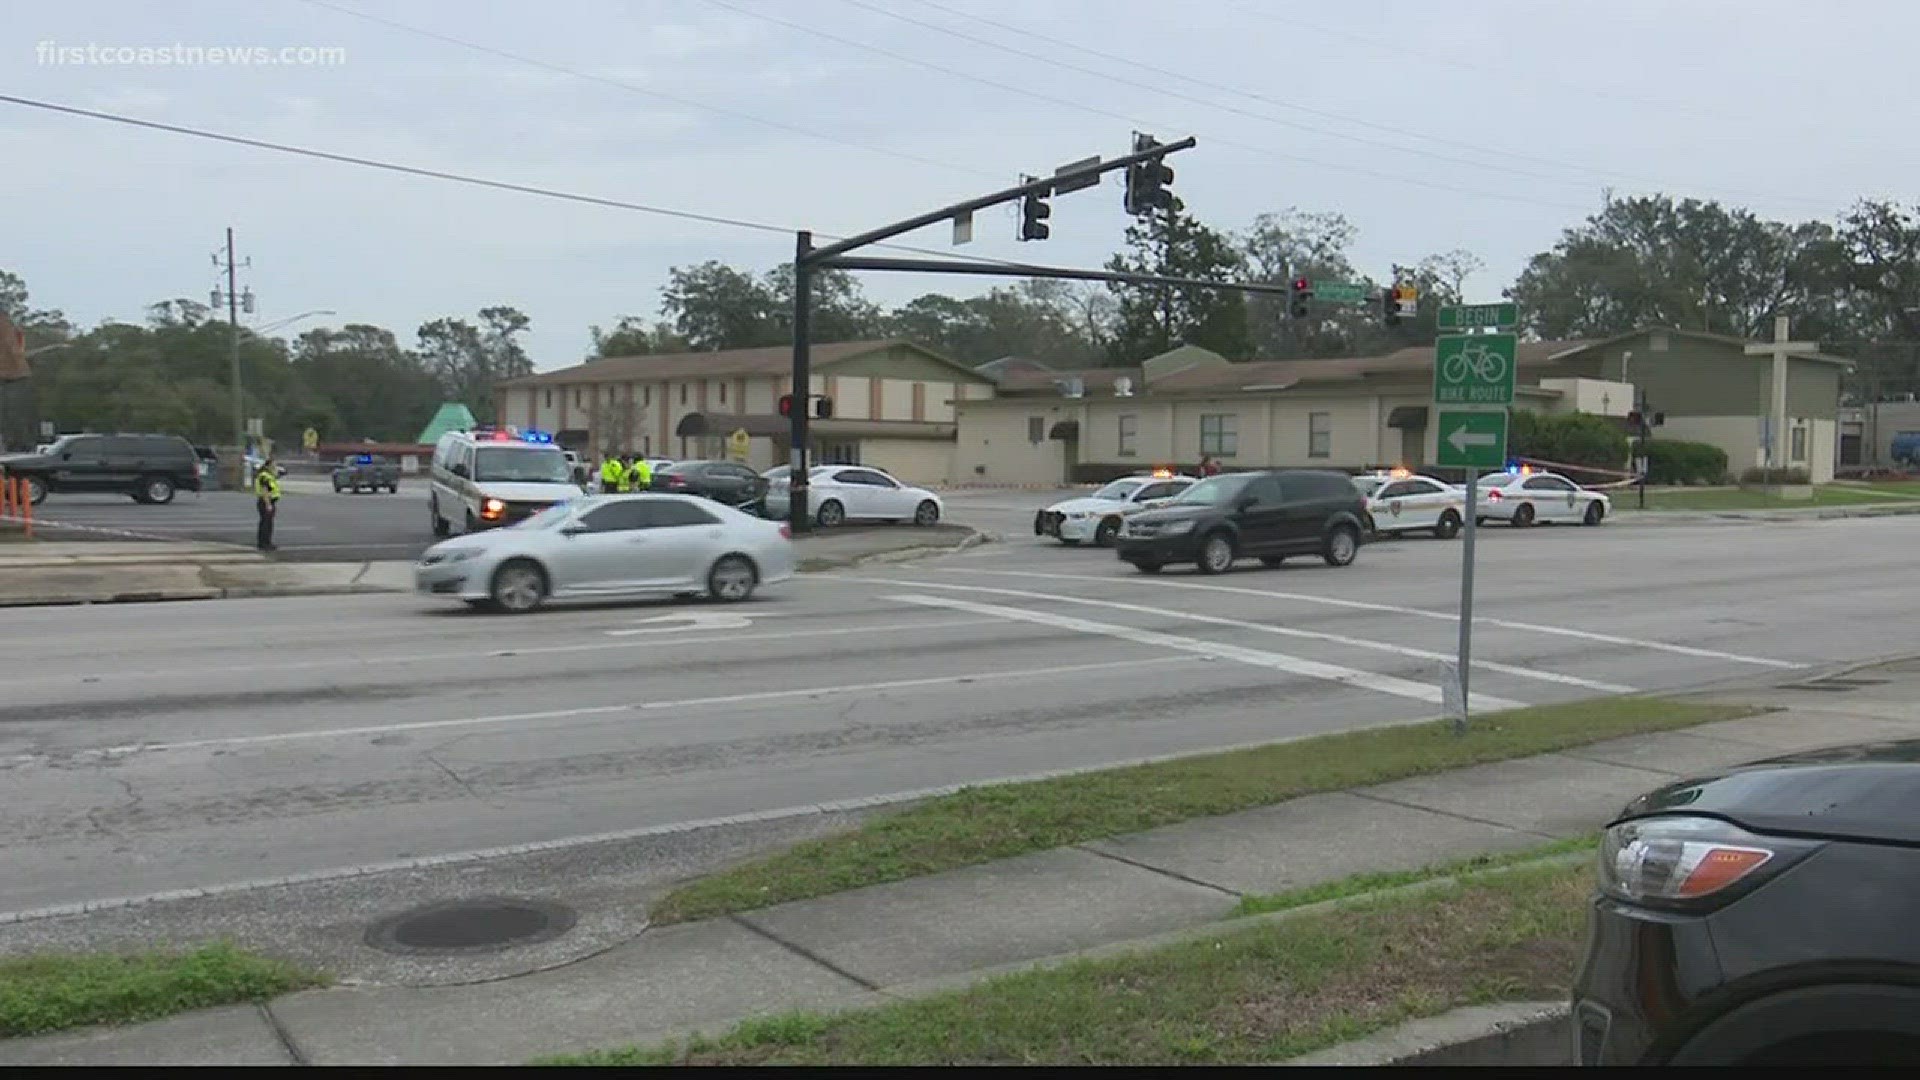 FCN reporter Janny Rodriguez has the latest on an incident where a child fell out of a moving car and was then struck by another vehicle.